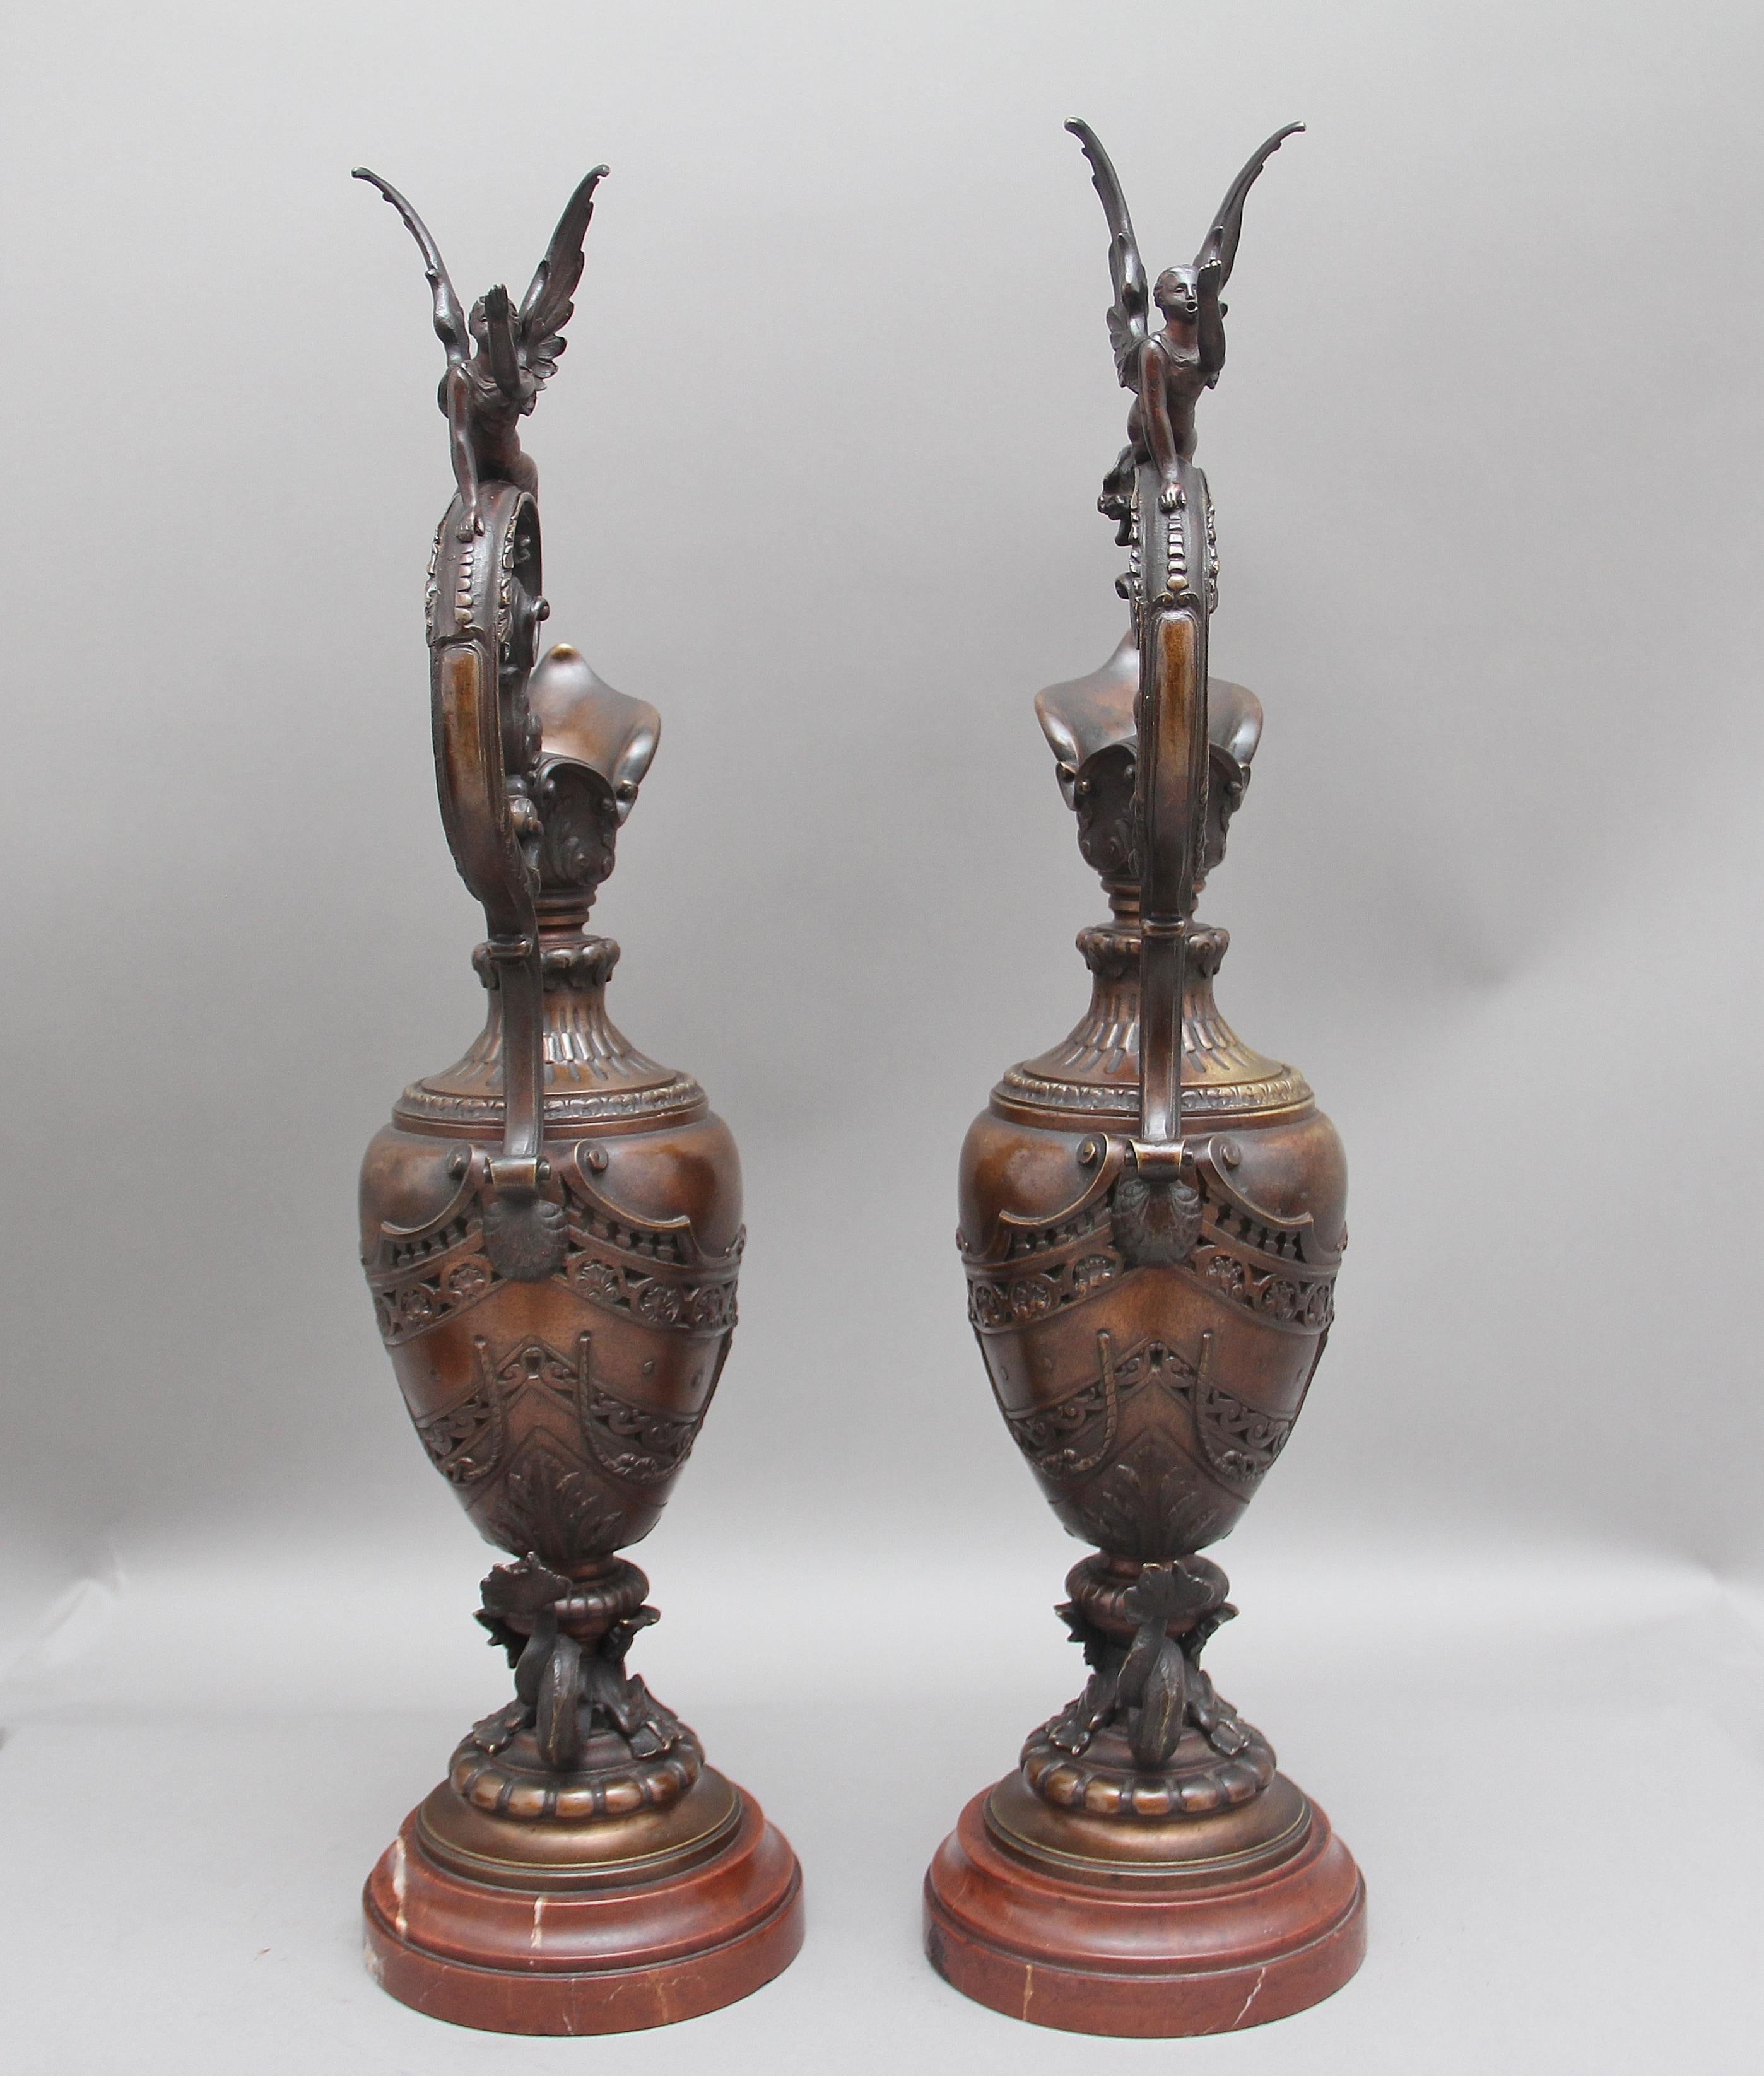 A decorative and rare pair of 19th century French bronze and marble ewers, having angels on top of the elegantly shaped handles, very fine detail throughout the ewers including lion masks and serpents, supported on rouge marble bases. Lovely patina